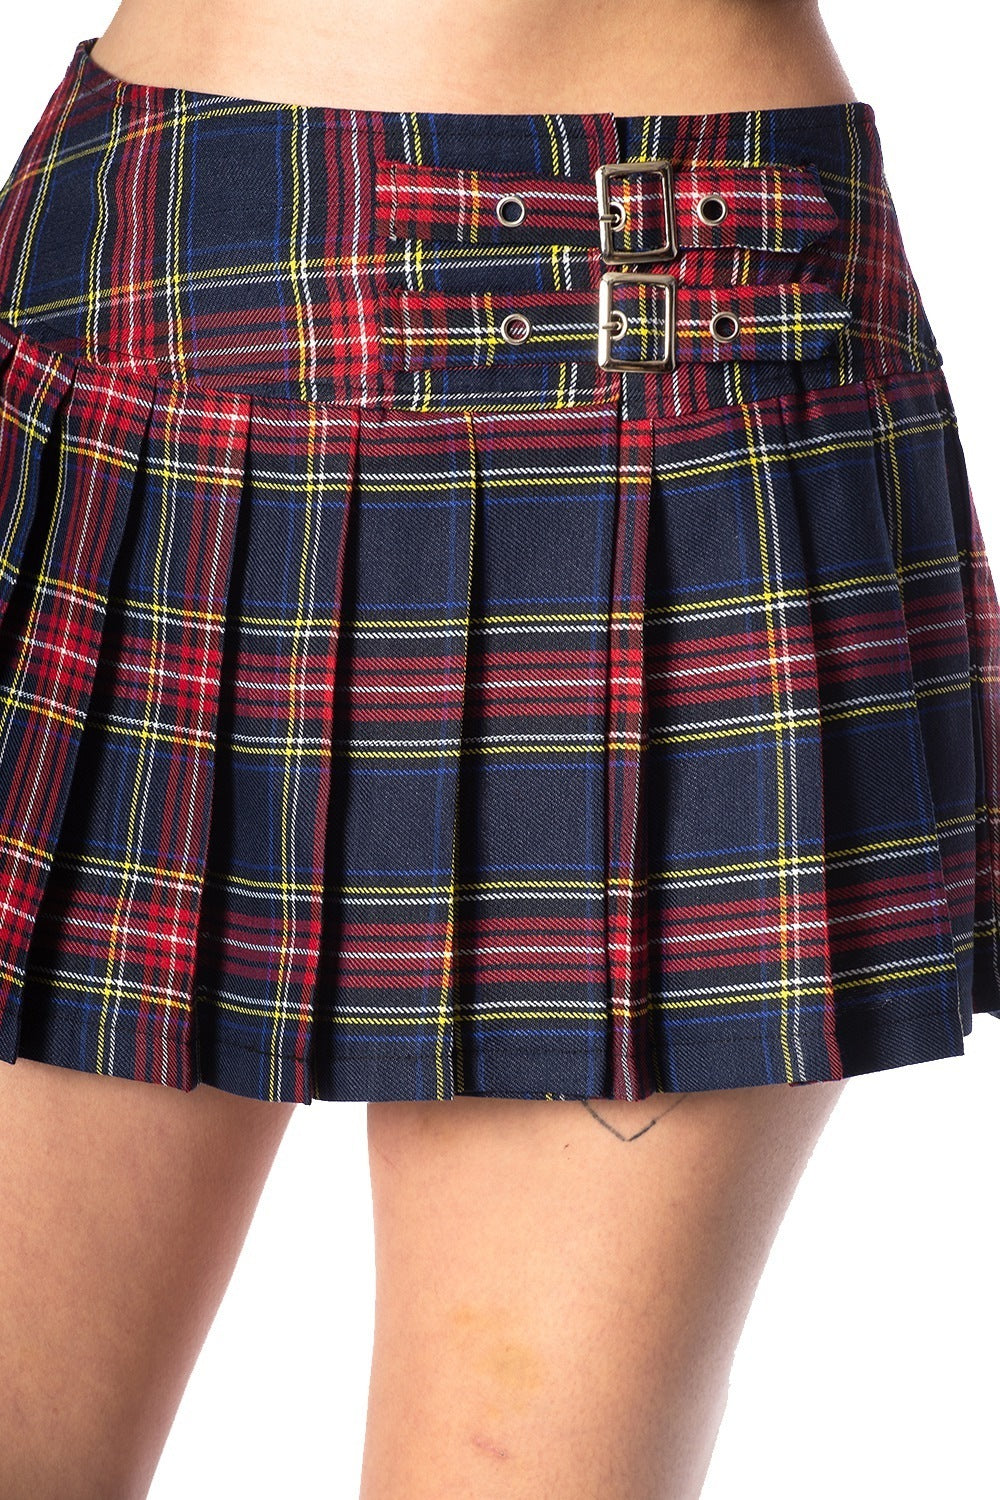 Navy and red tartan skirt with buckles 